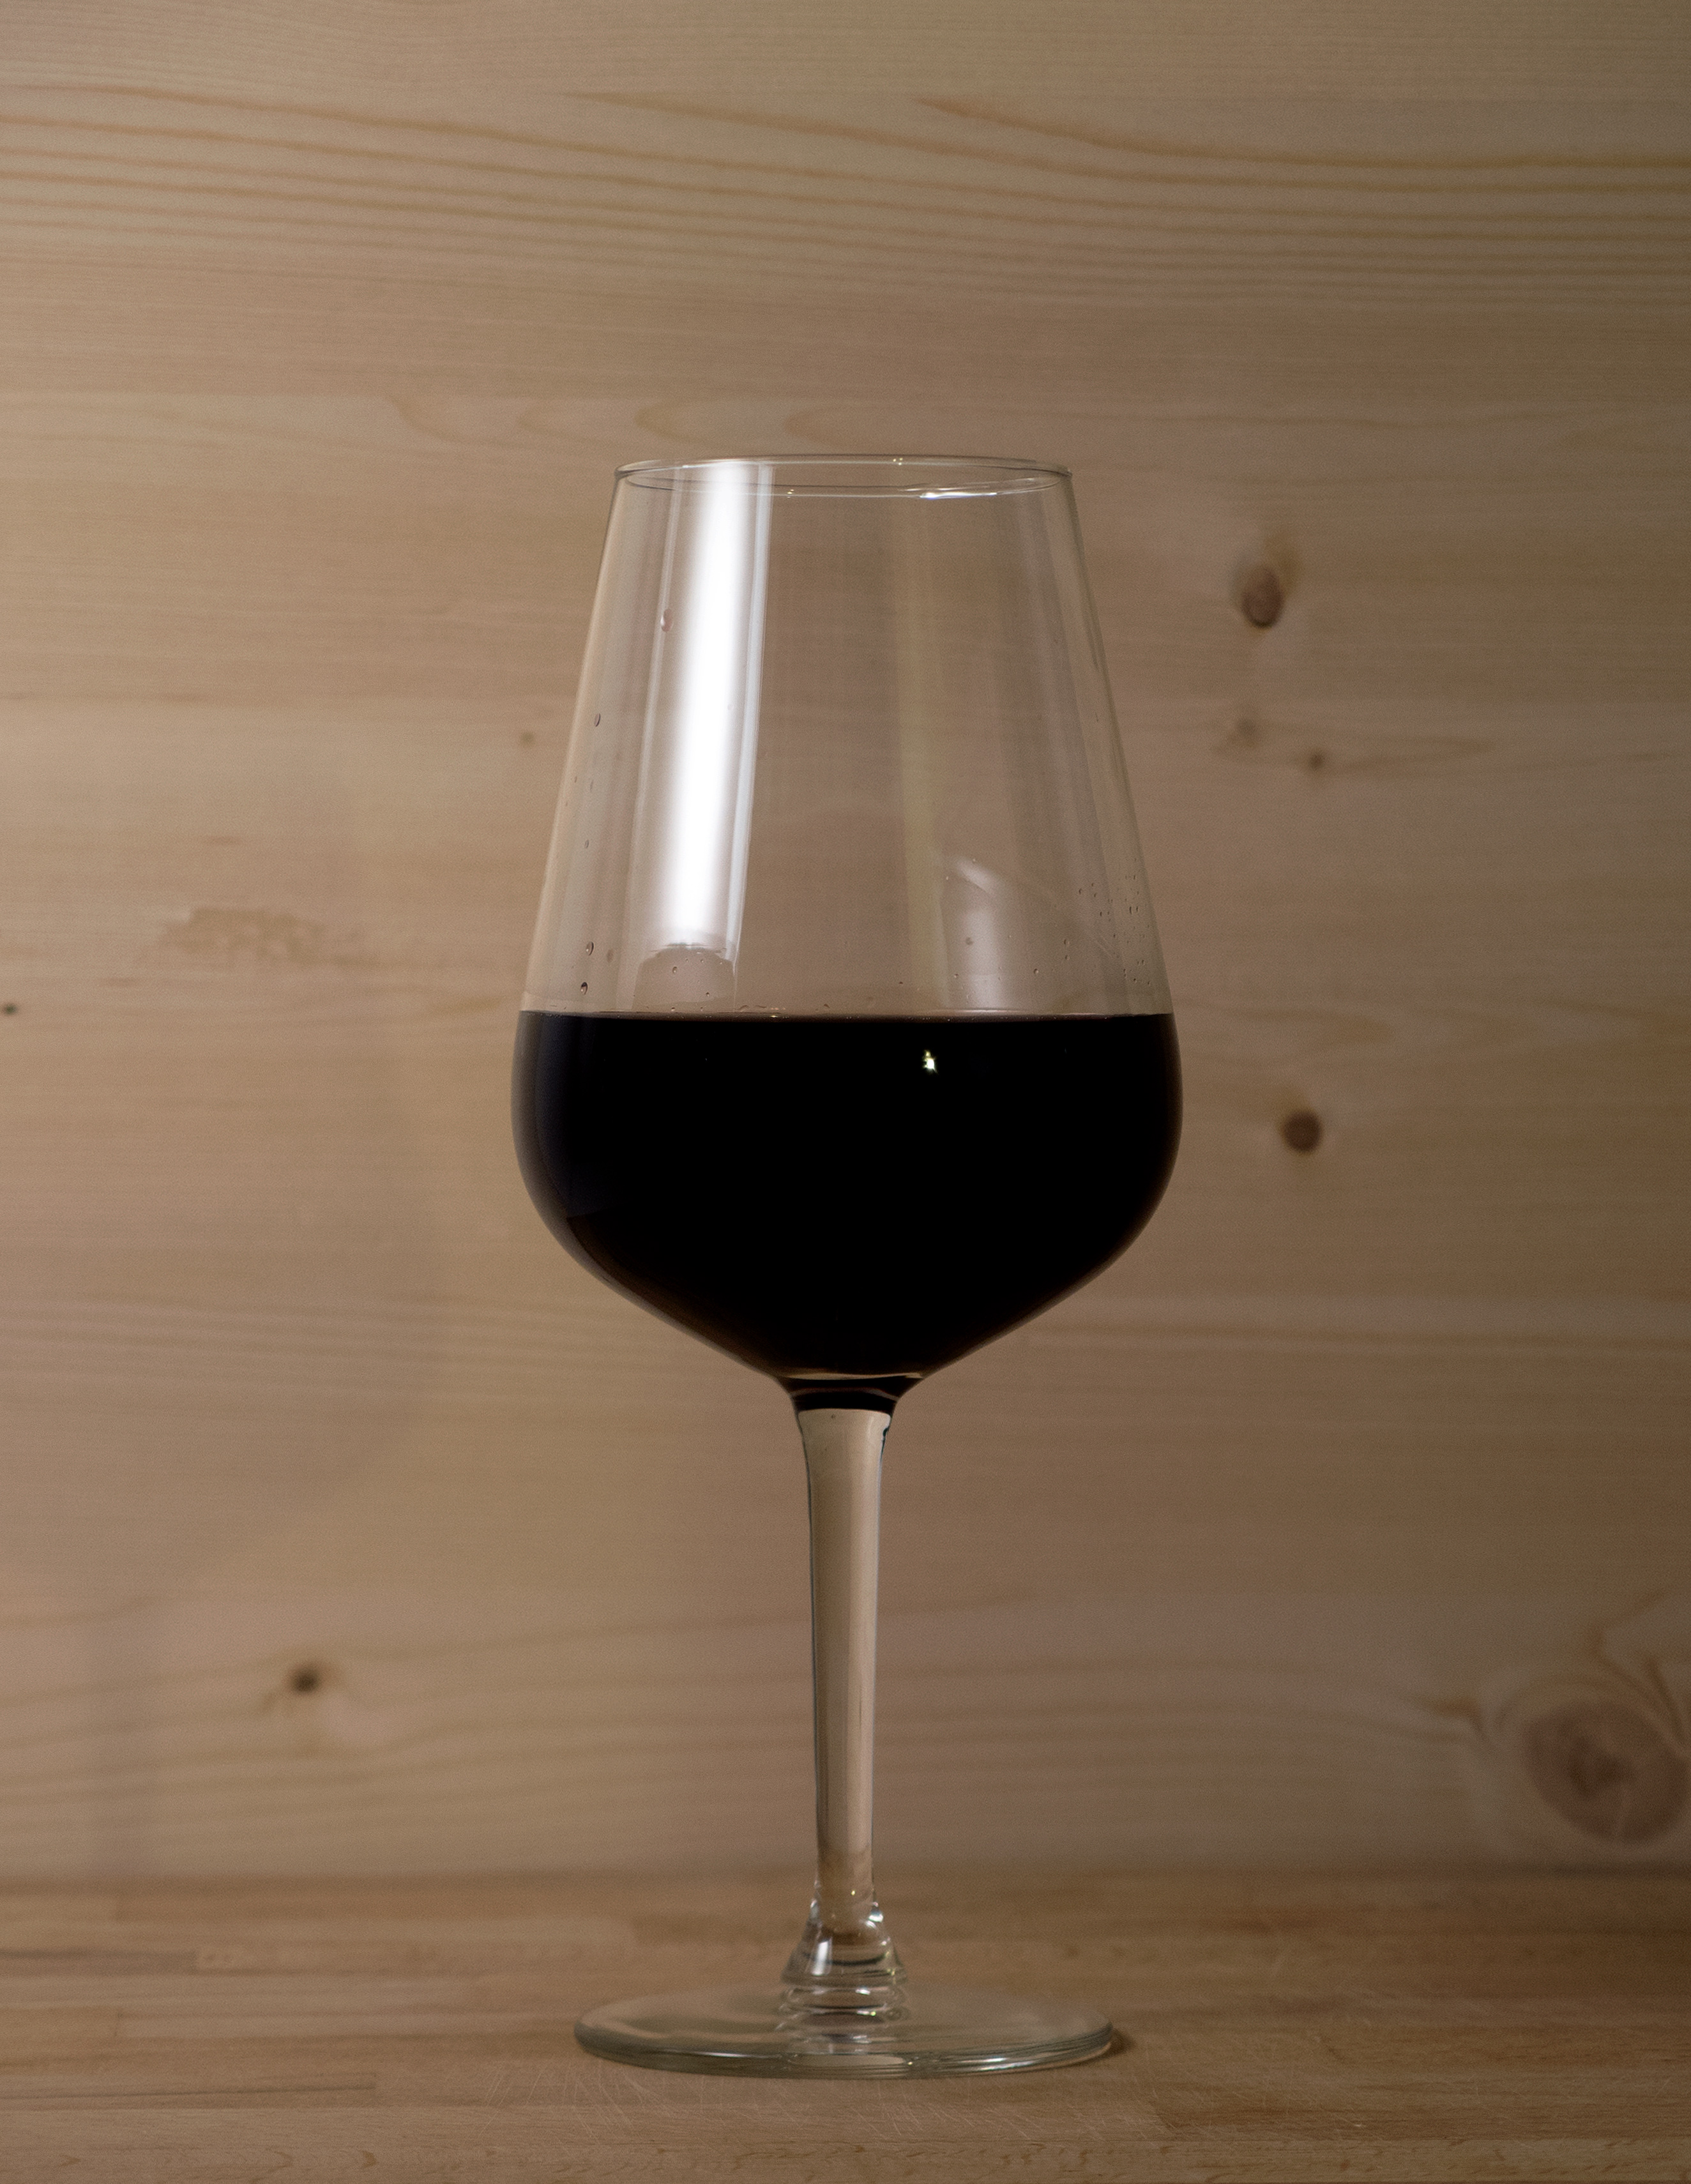 FREE IMAGE: Glass Of Red Wine | Libreshot Public Domain Photos